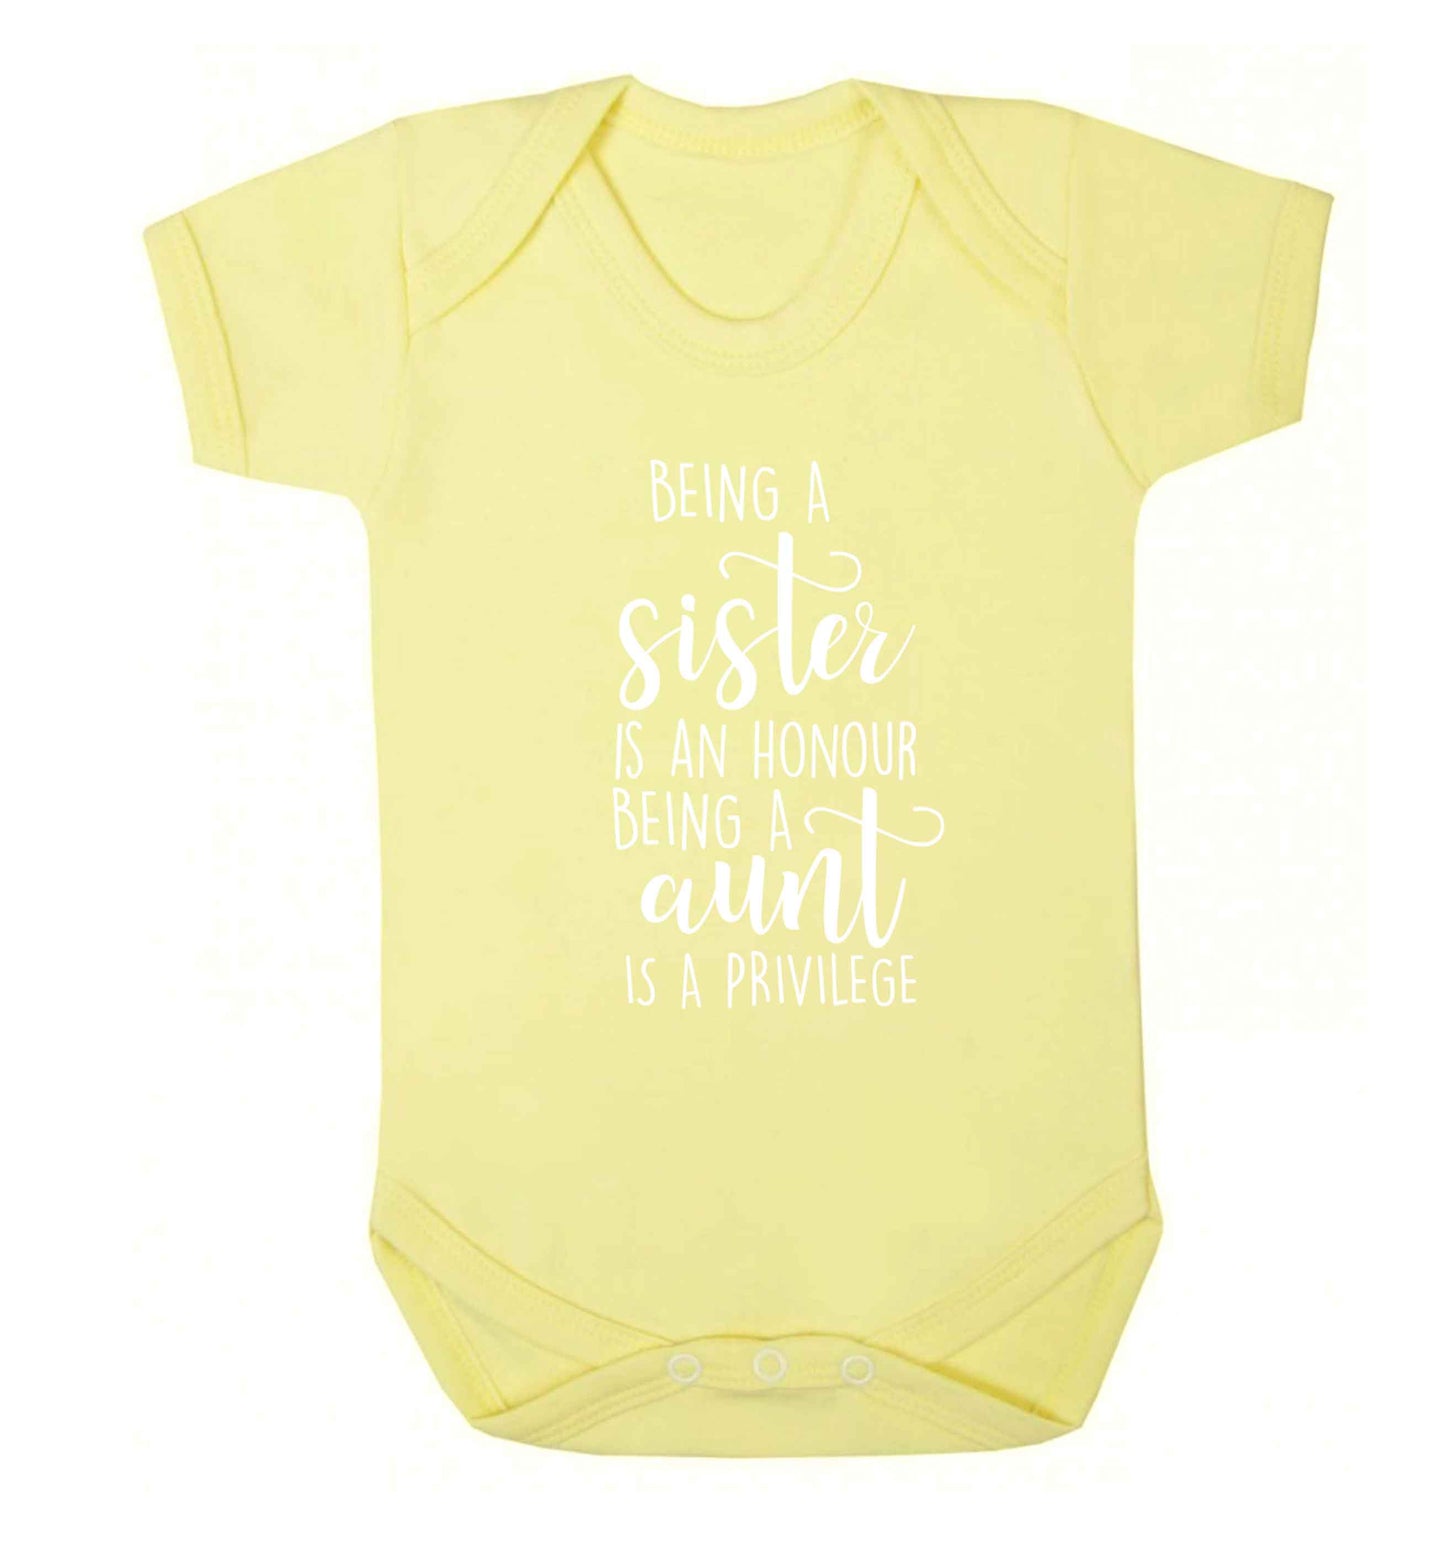 Being a sister is an honour being an auntie is a privilege Baby Vest pale yellow 18-24 months